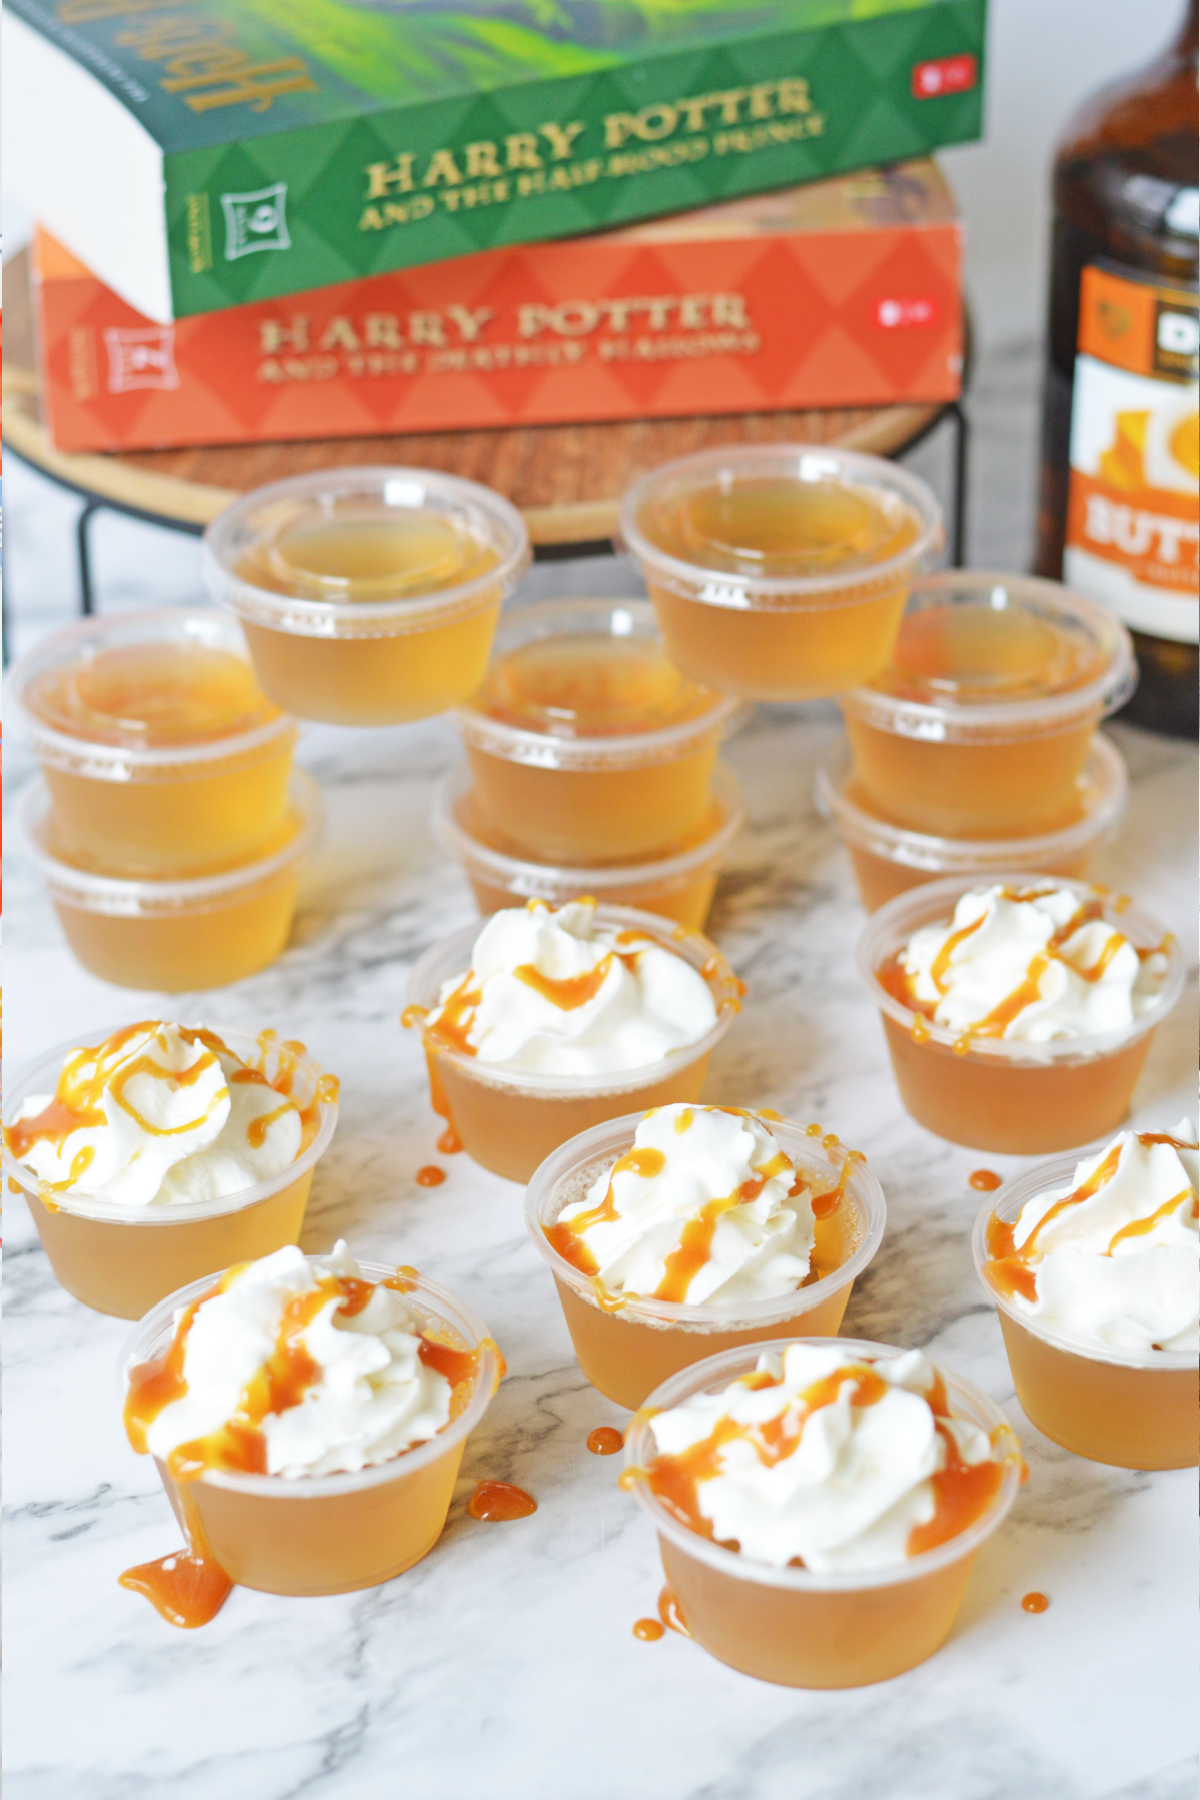 Butterbeer Jello Shots with Harry Potter books